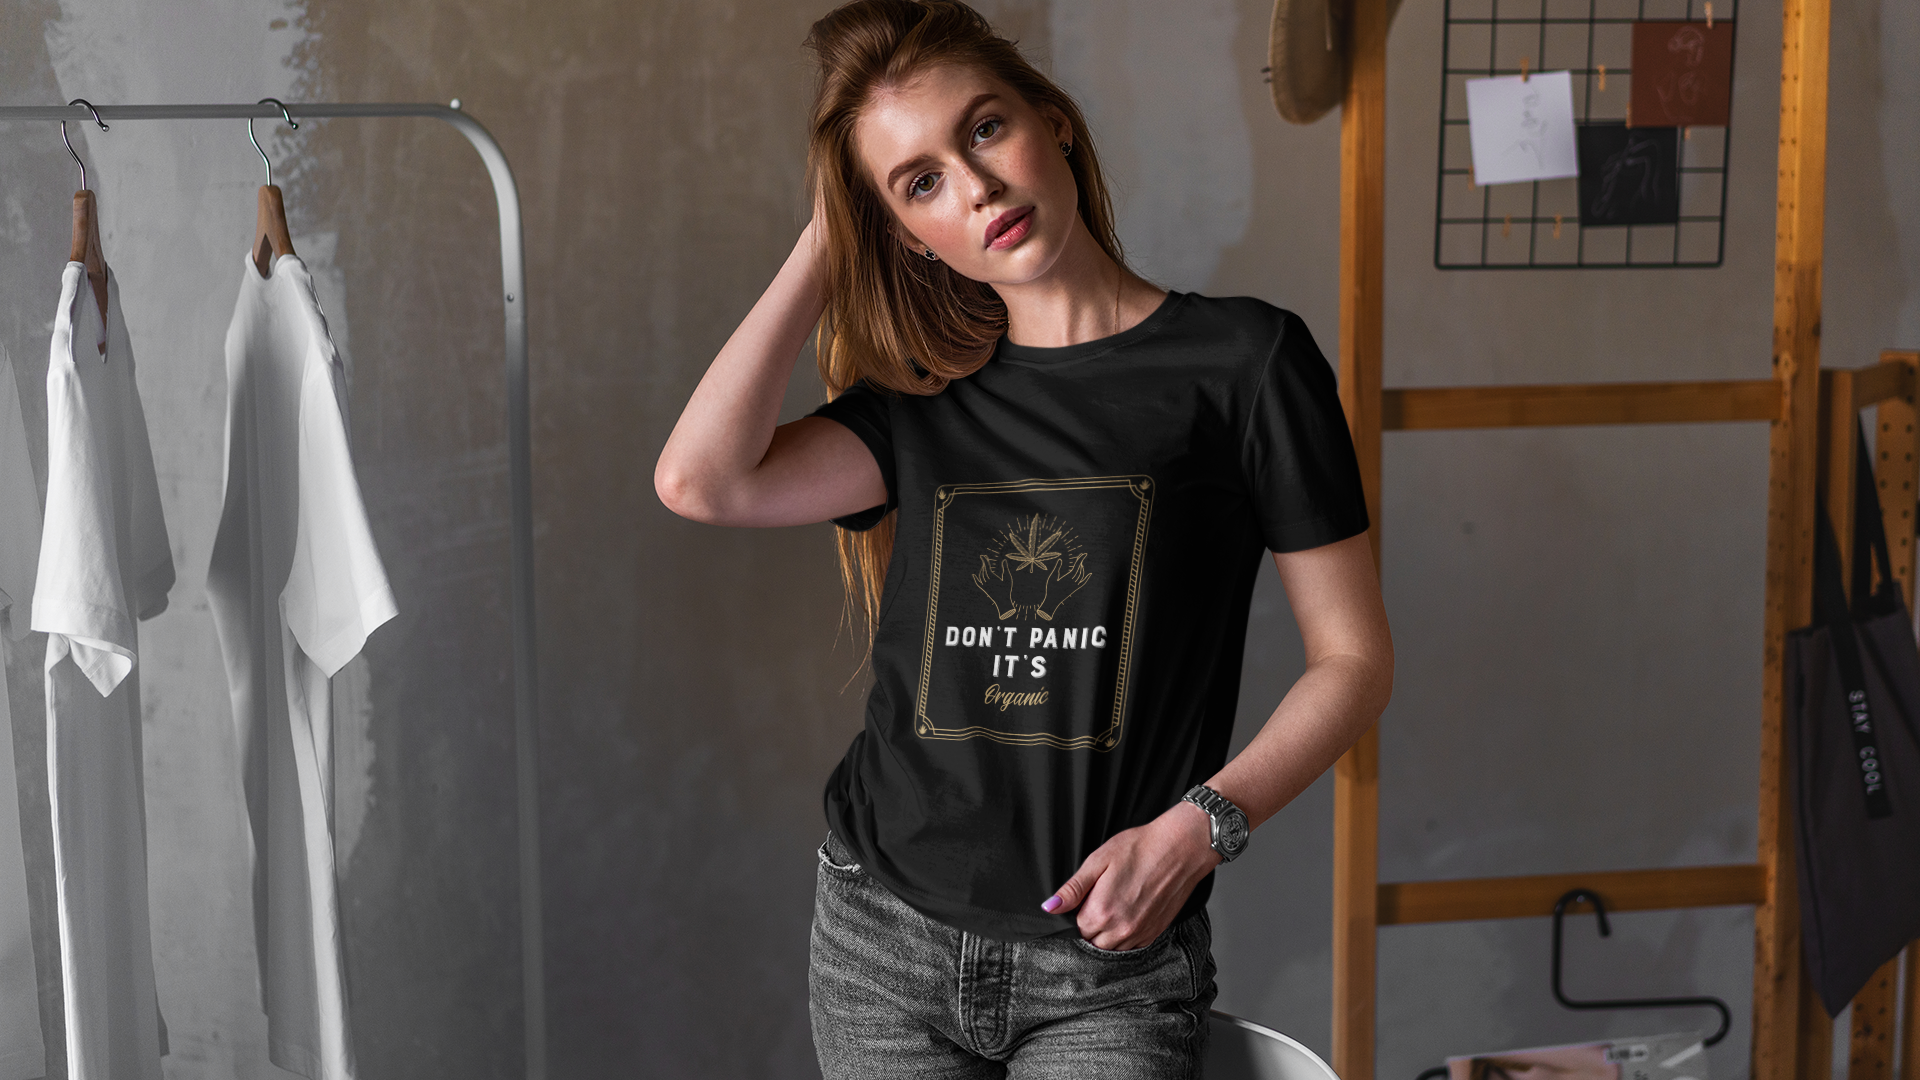 mockup-of-a-woman-wearing-a-t-shirt-in-a-small-boutique-4972-el1